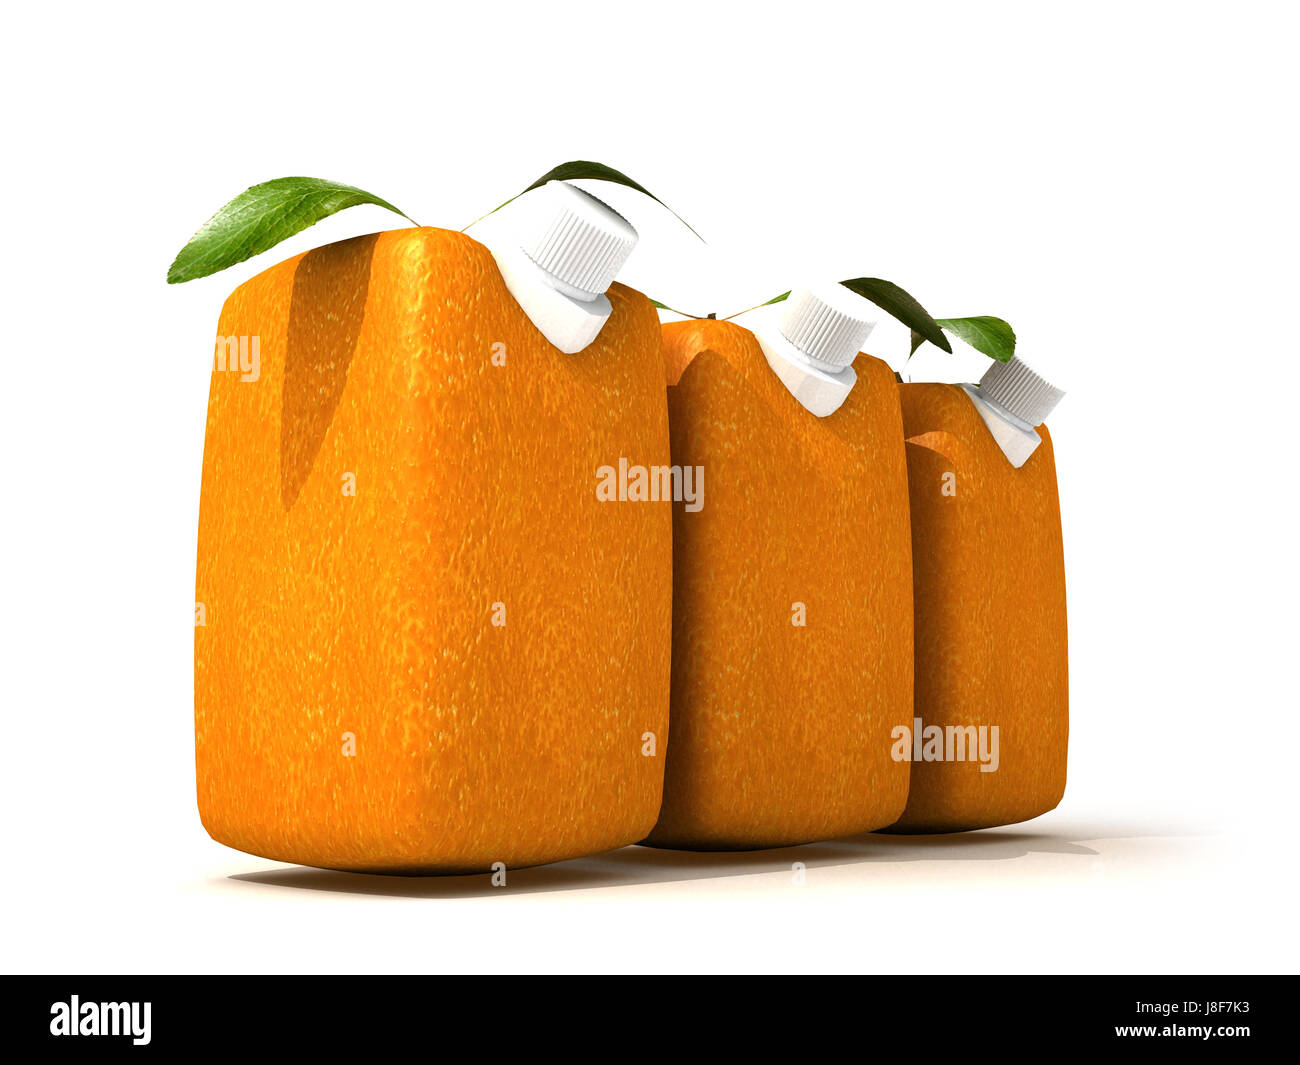 orange, sweet, industry, science, agriculture, farming, fruit, nectar, bottle, Stock Photo